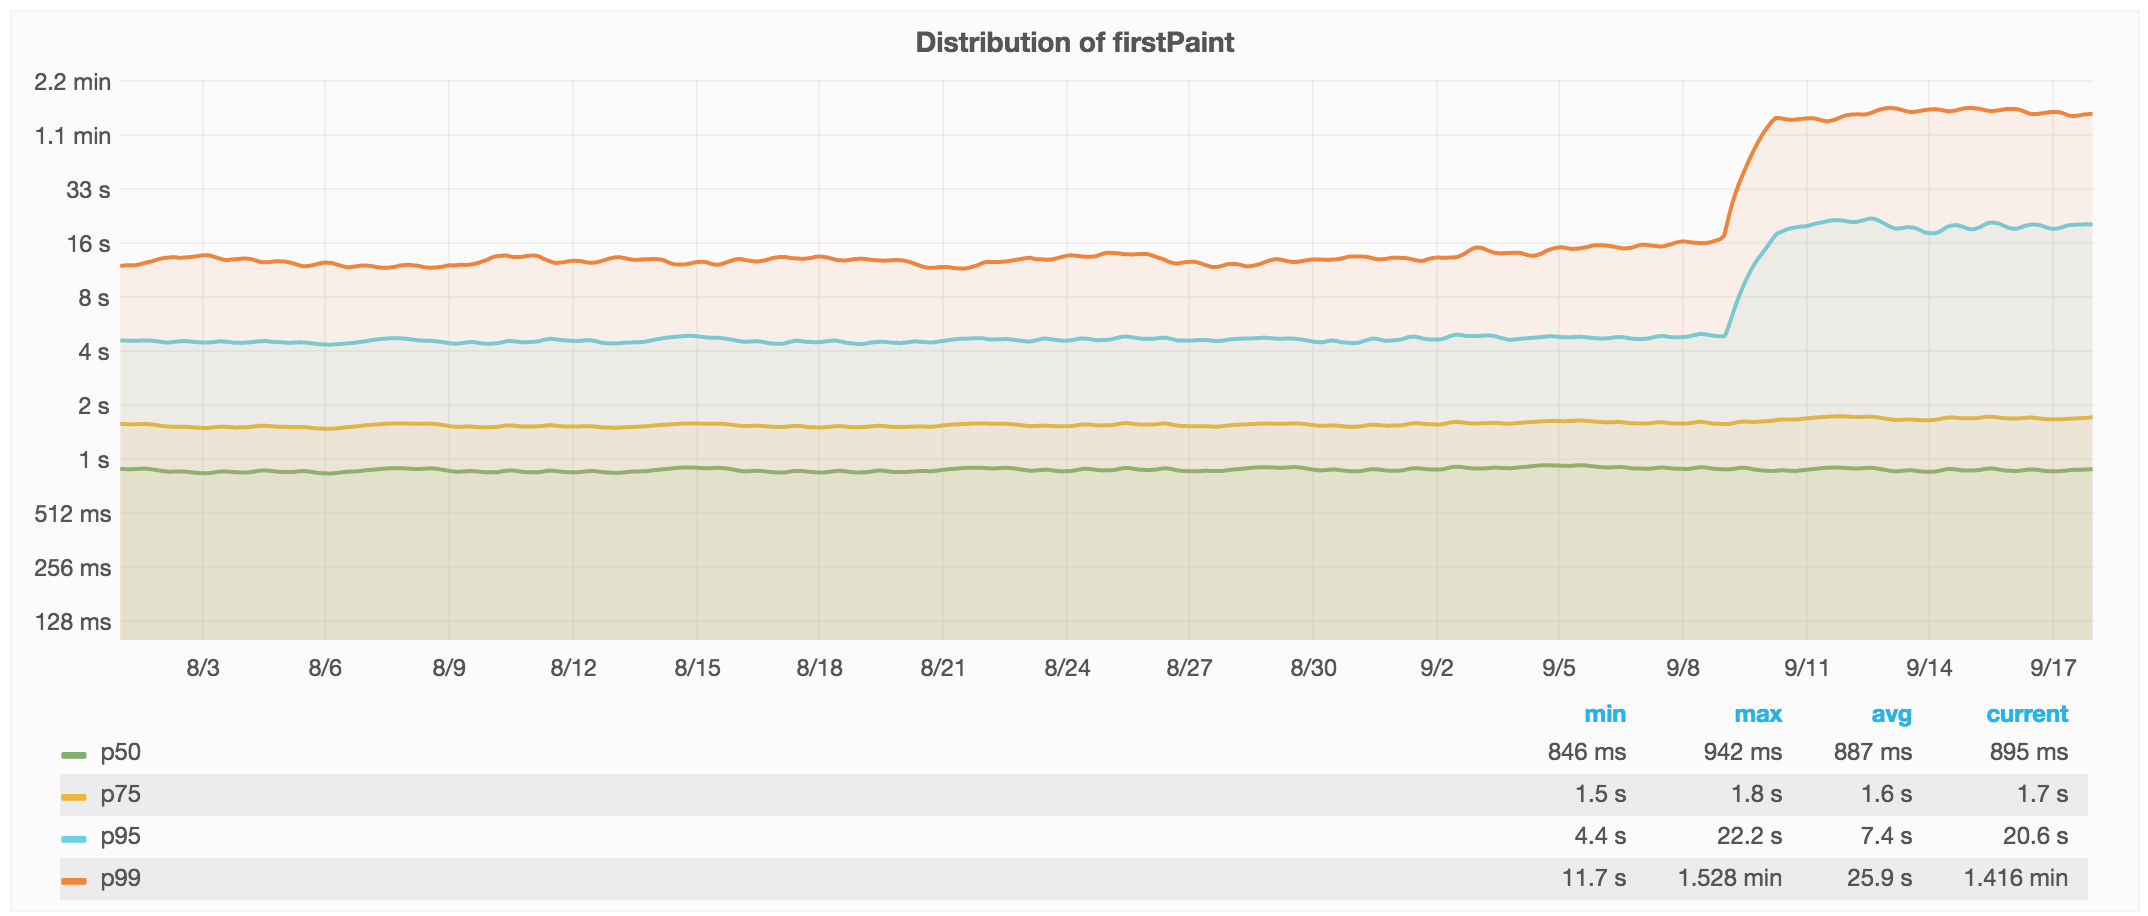 A graph of the distribution of firstPaint